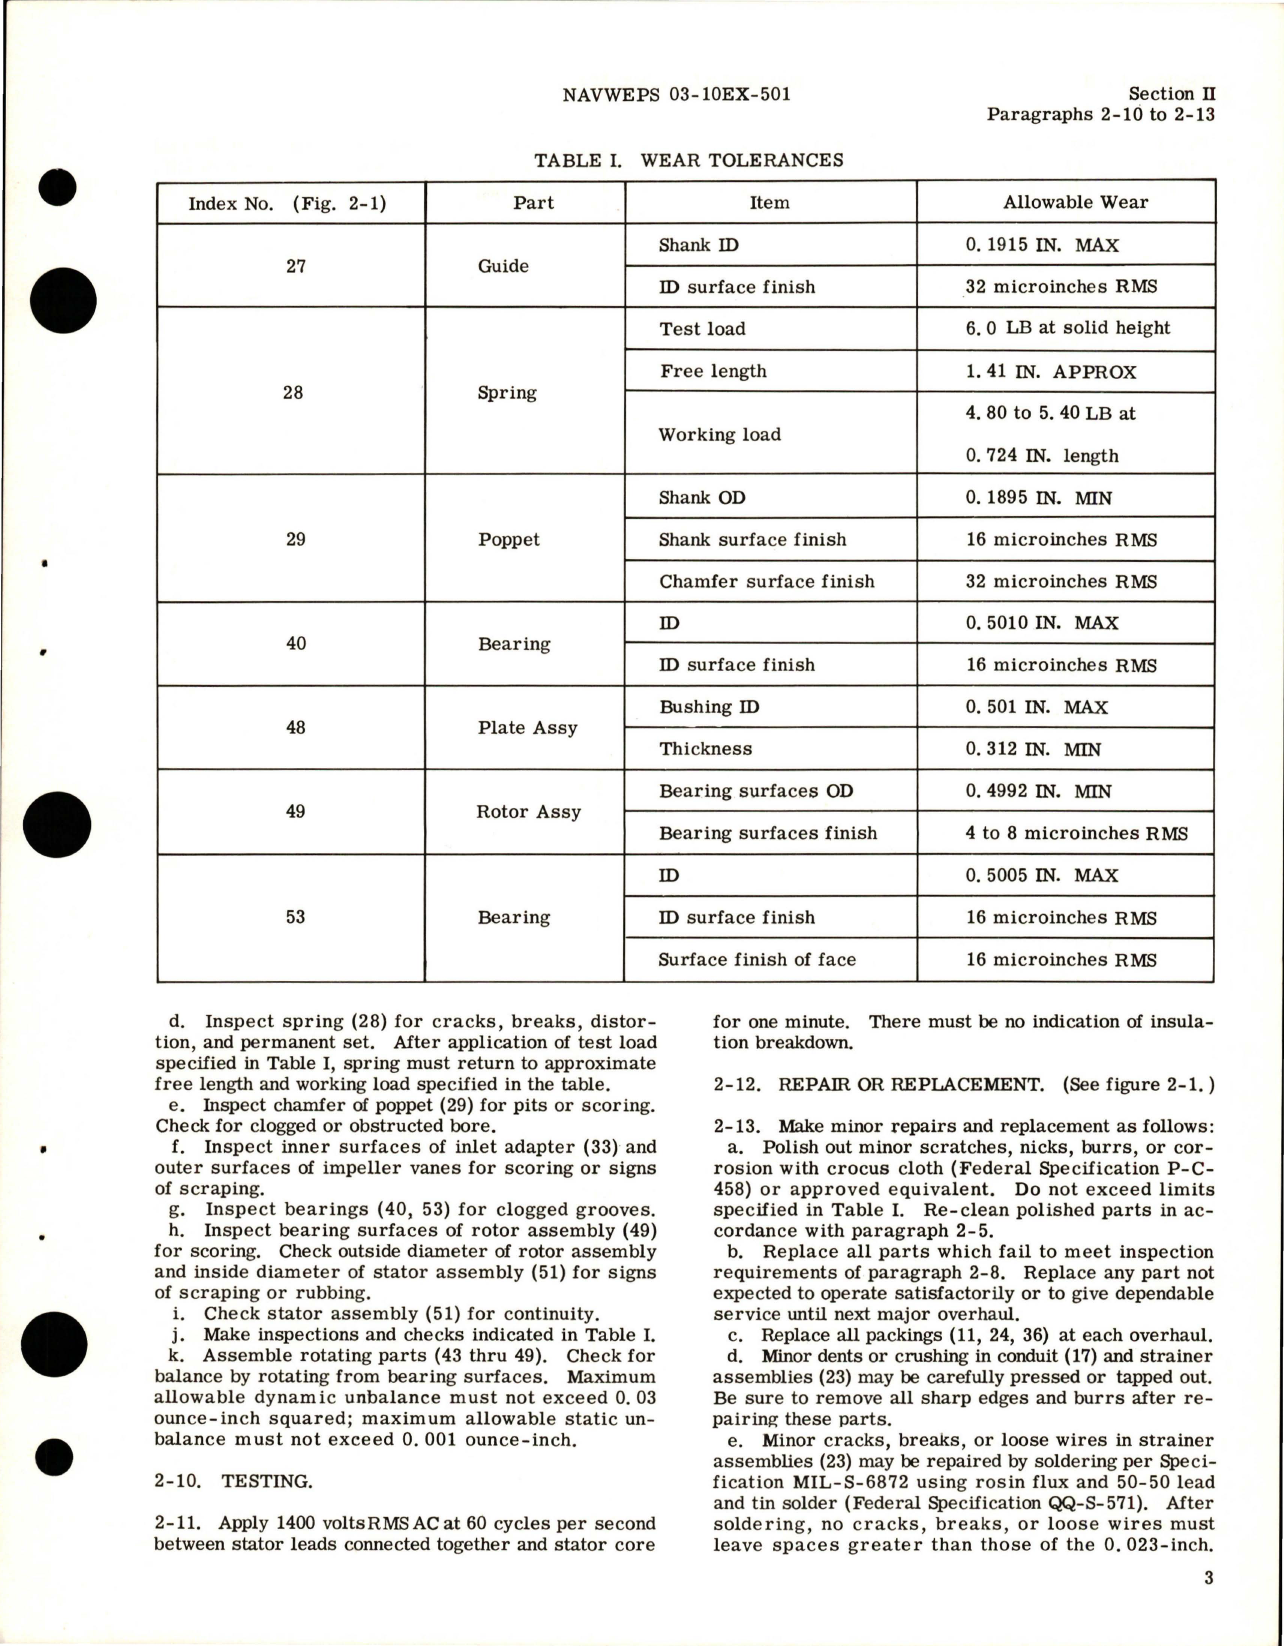 Sample page 5 from AirCorps Library document: Overhaul Instructions for Fuel Booster Pump